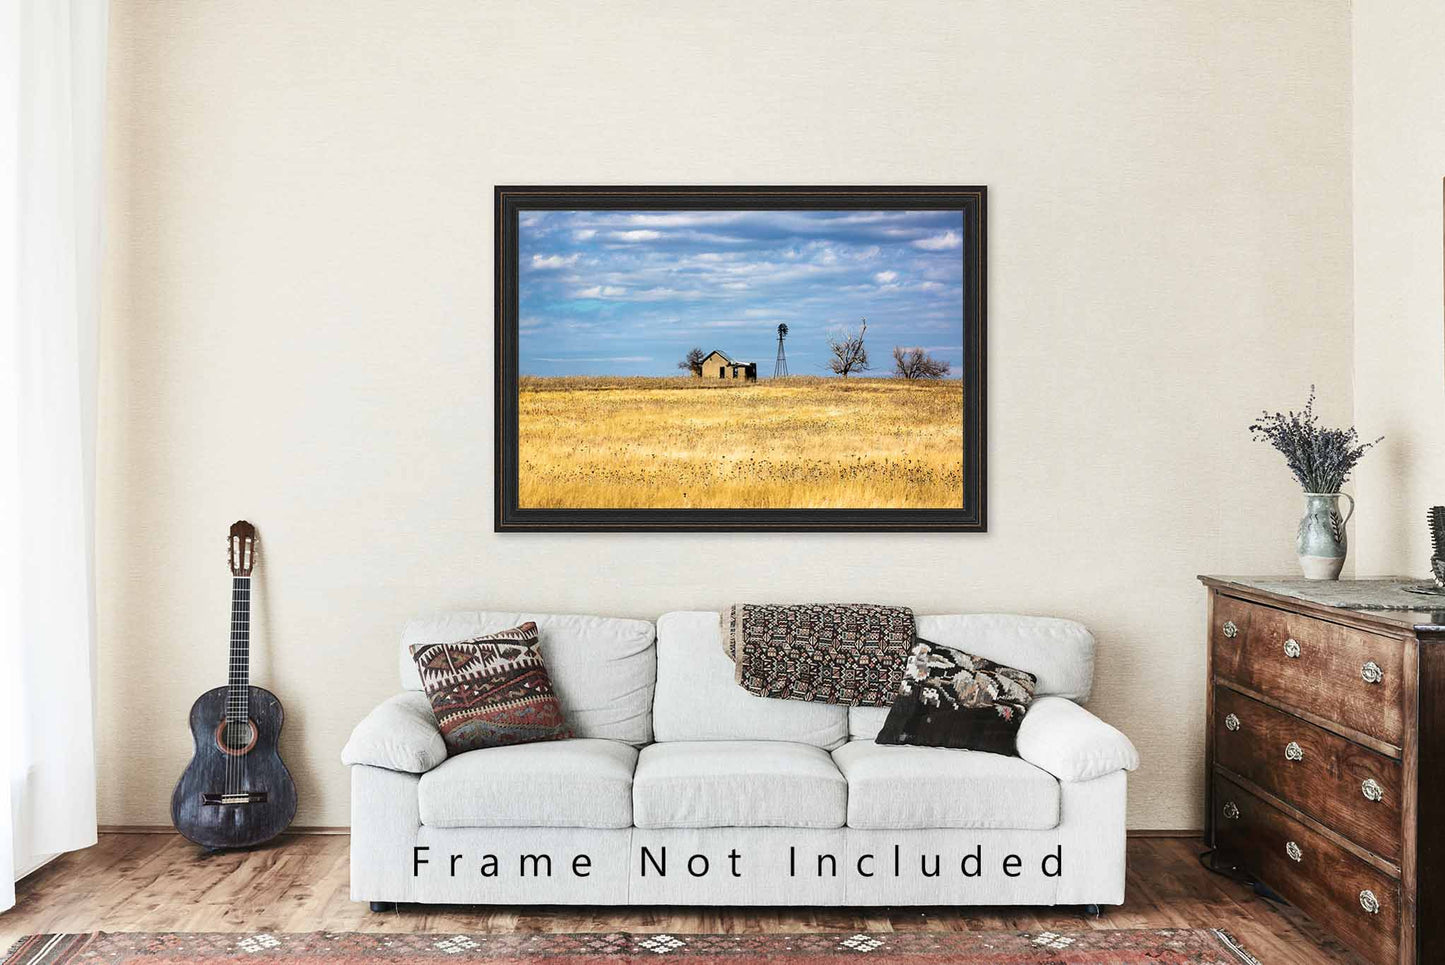 Country Photography Print (Not Framed) Picture of Abandoned Homestead and Windmill in Golden Field on Spring Day in Oklahoma Great Plains Wall Art Farmhouse Decor